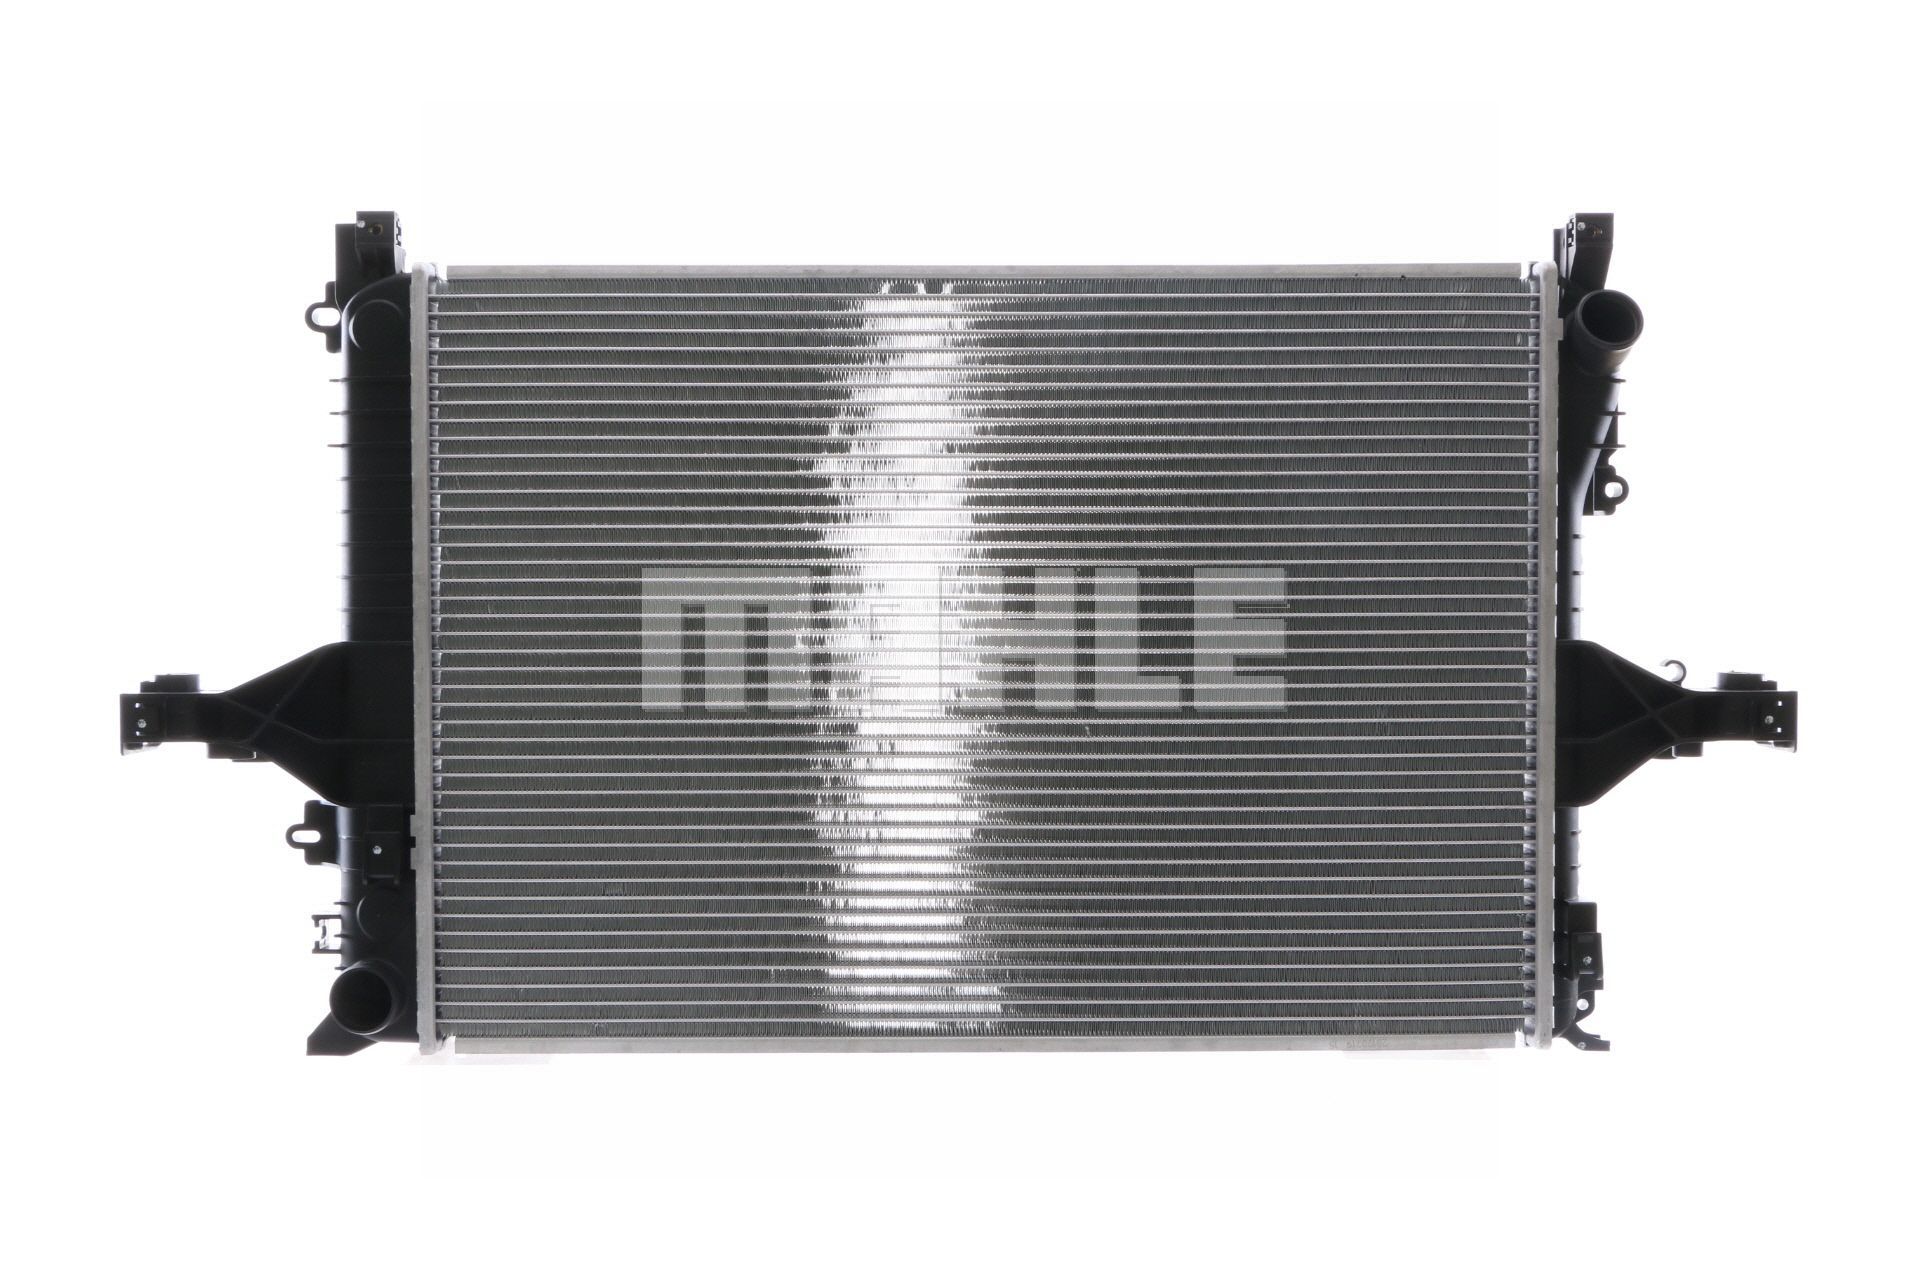 MAHLE ORIGINAL CR 1546 000S Engine radiator for vehicles with/without air conditioning, 620 x 428 x 36 mm, with guide sleeve, Manual Transmission, Brazed cooling fins